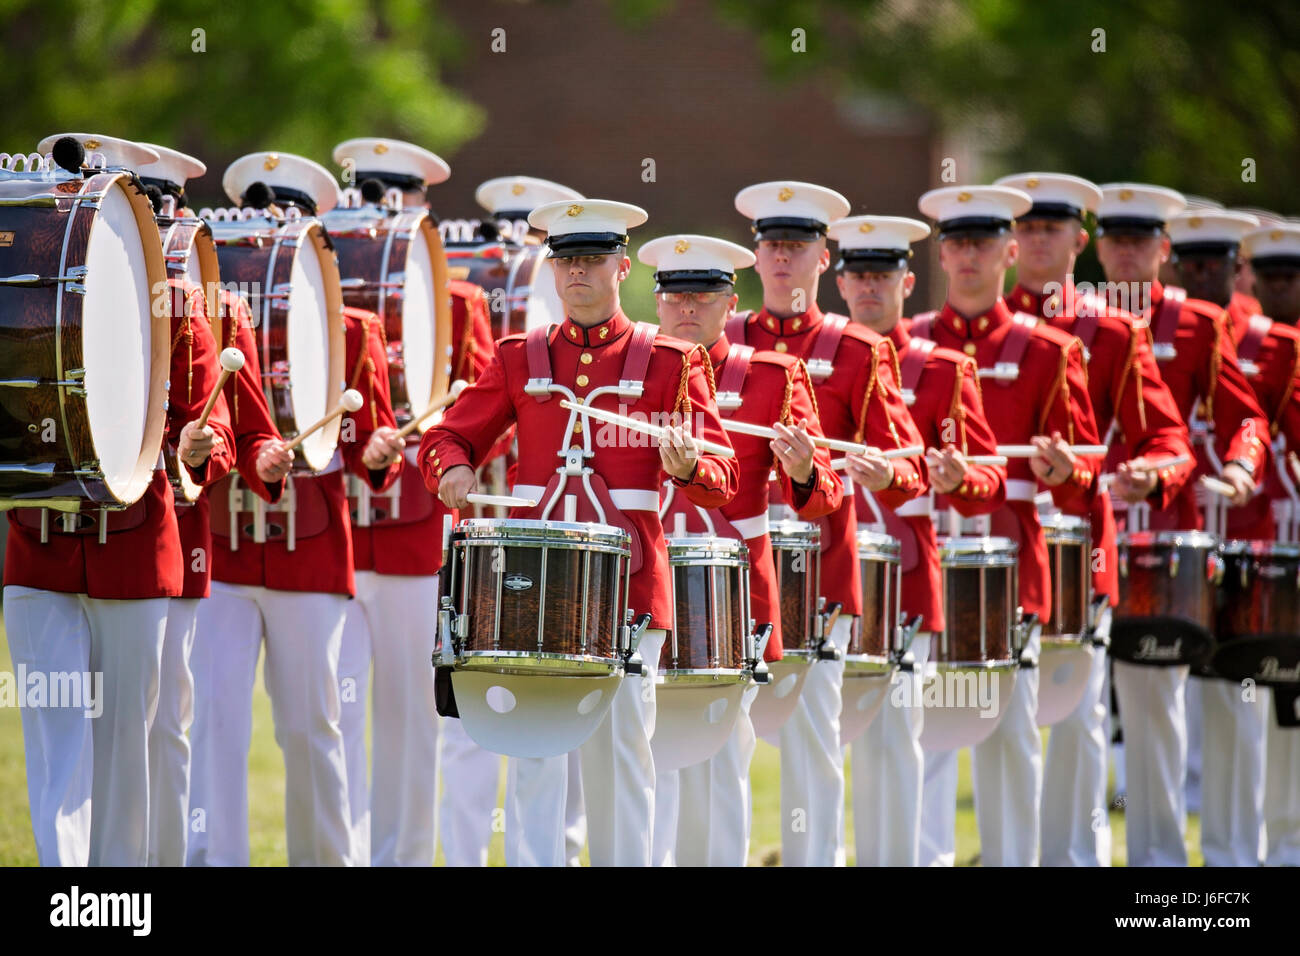 The U.S. Marine Drum & Bugle Corps march during the Centennial Celebration Ceremony at Lejeune Field, Marine Corps Base (MCB) Quantico, Va., May 10, 2017. The event commemorates the founding of MCB Quantico in 1917, and consisted of performances by the U.S. Marine Corps Silent Drill Platoon and the U.S. Marine Drum & Bugle Corps. (U.S. Marine Corps photo by James H. Frank) Stock Photo